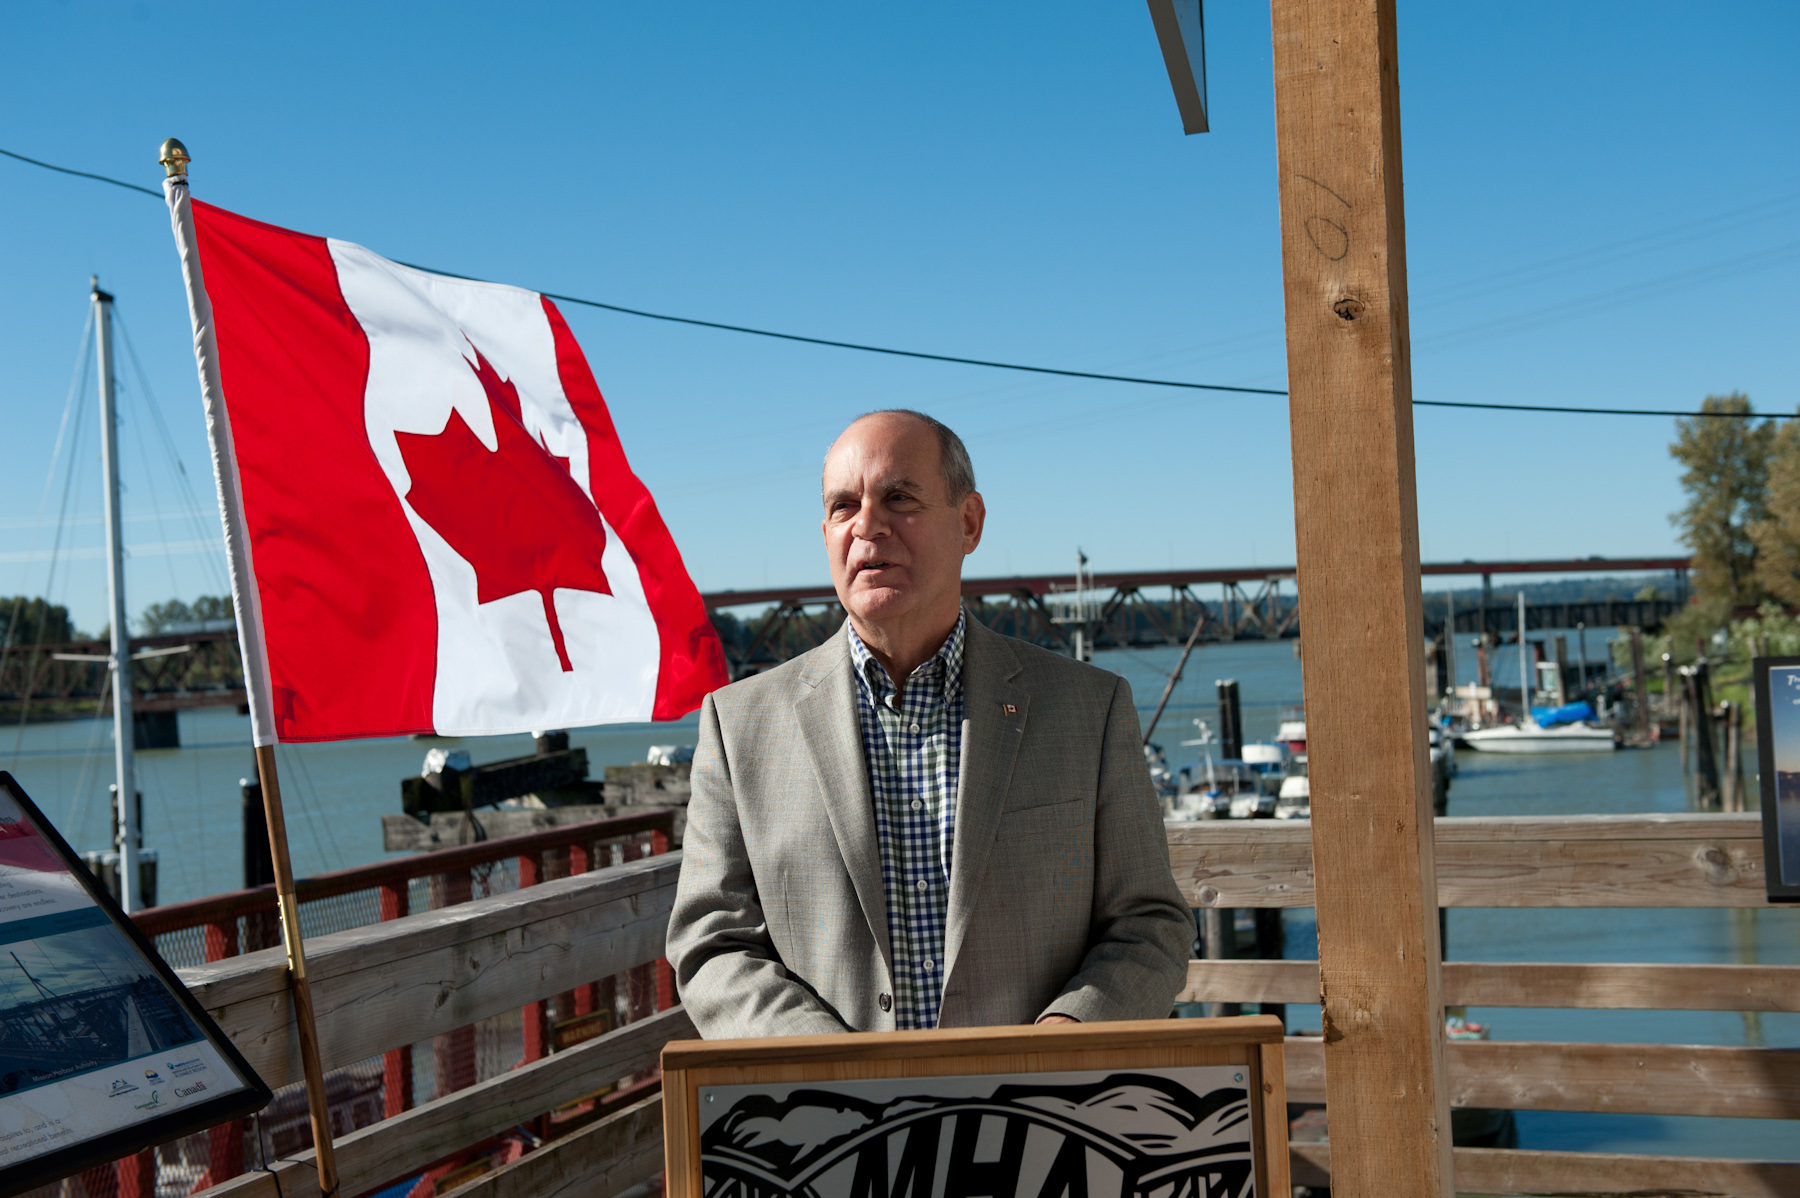 Randy Kamp, Member of Parliament for Pitt Meadows-Maple Ridge-Mission, announces the Government of Canada¿s investment in a small craft harbour project at Mission Harbour, B.C., on behalf of the Honourable Gail Shea, Minister of Fisheries and Oceans.